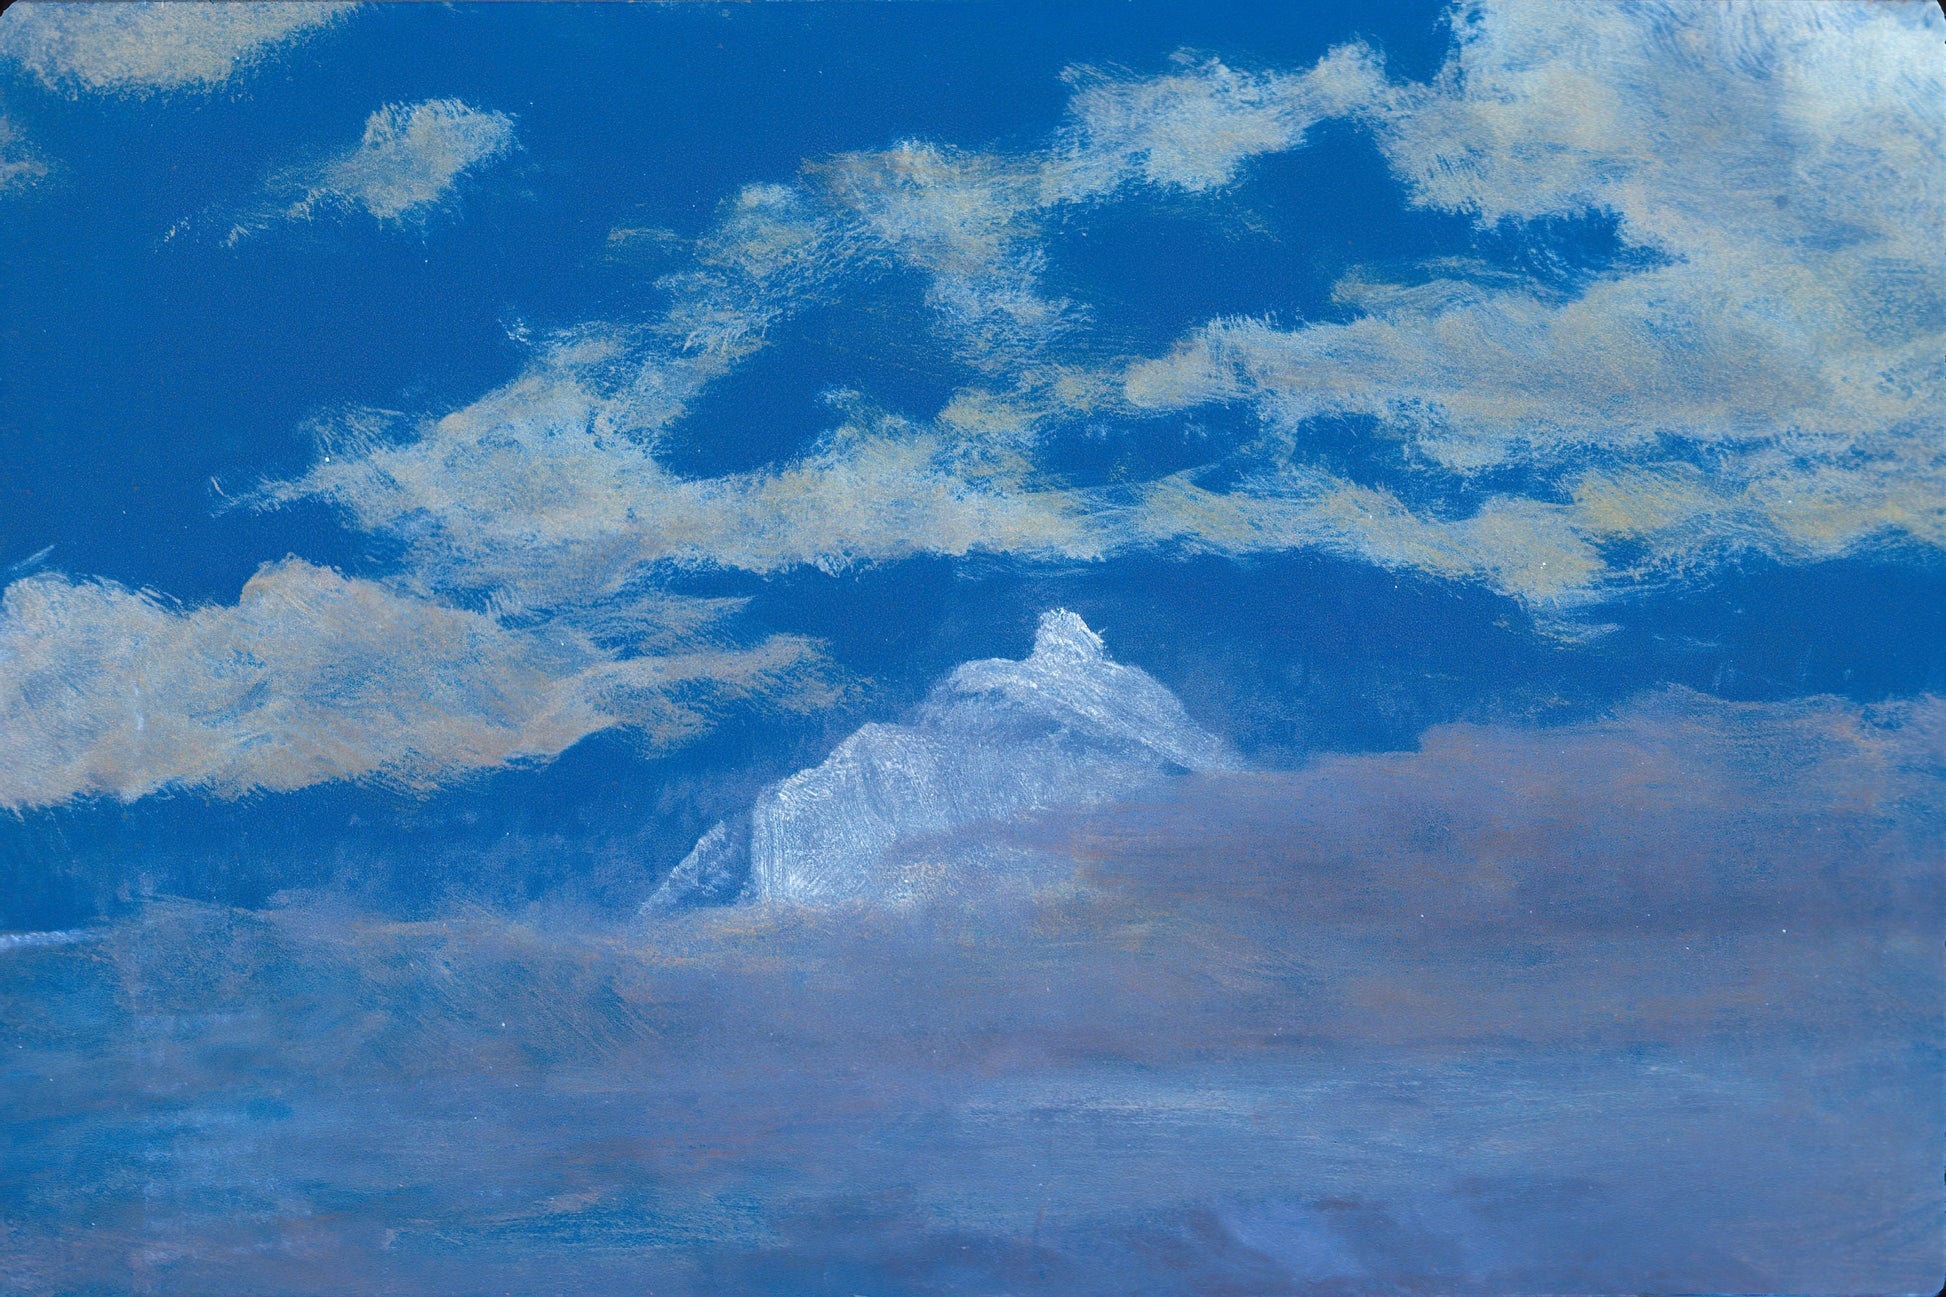 Cloud Study With Mountain Peak - by Albert Bierstadt,3d Printed with texture and brush strokes looks like original oil-painting, code:816